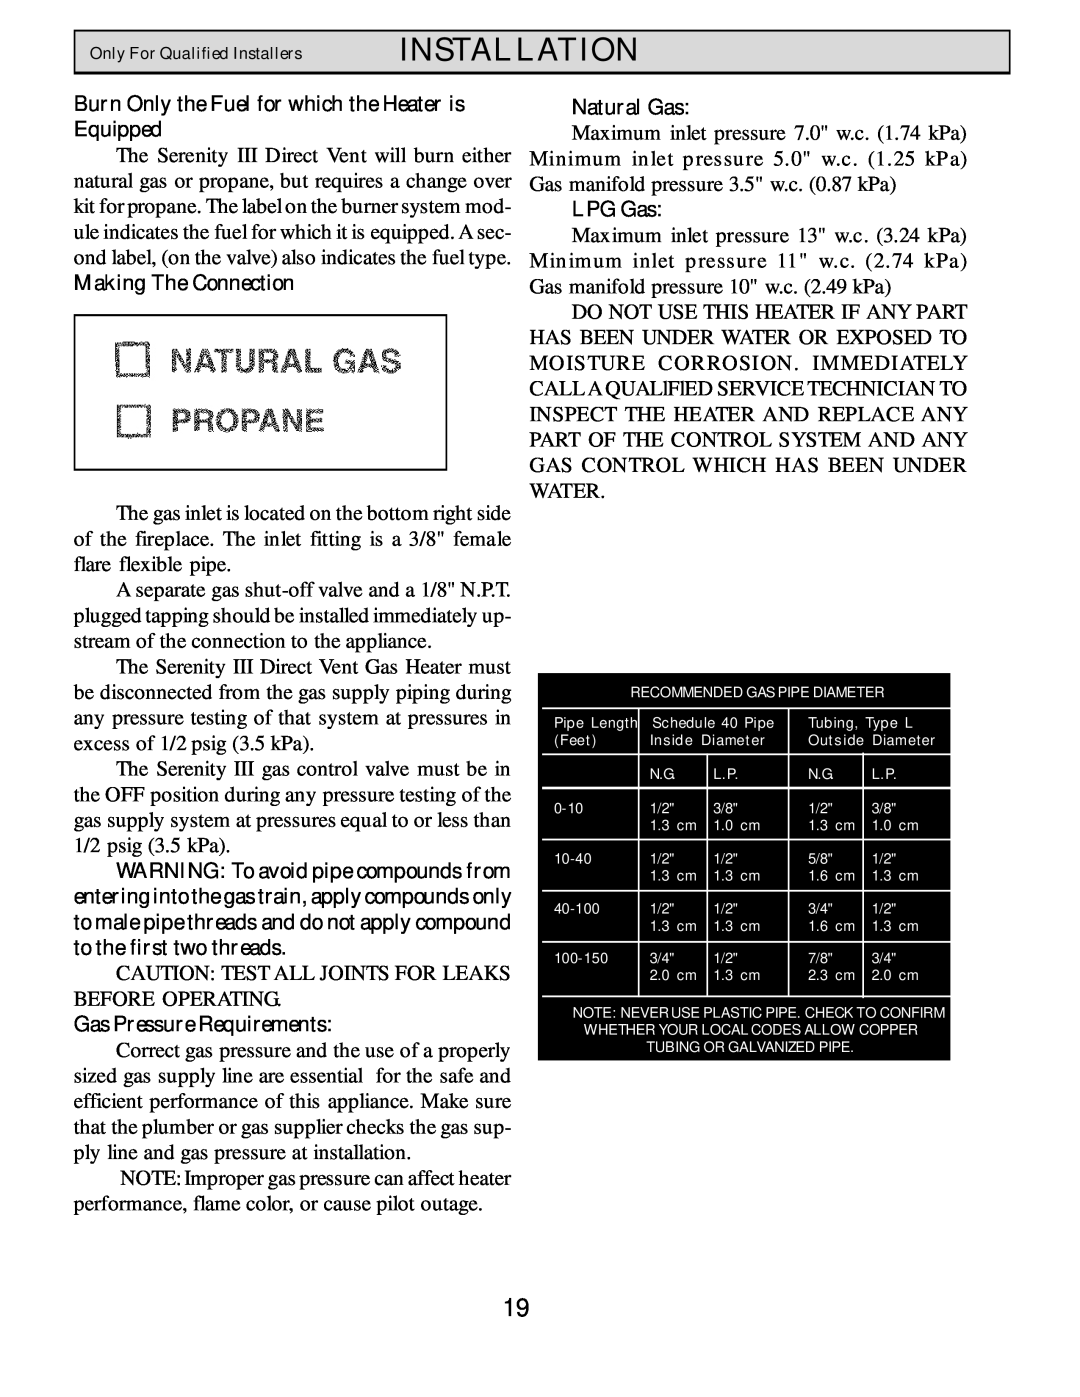 Harman Stove Company HB 38 DV manual Making The Connection, Gas Pressure Requirements, Natural Gas, LPG Gas, Installation 